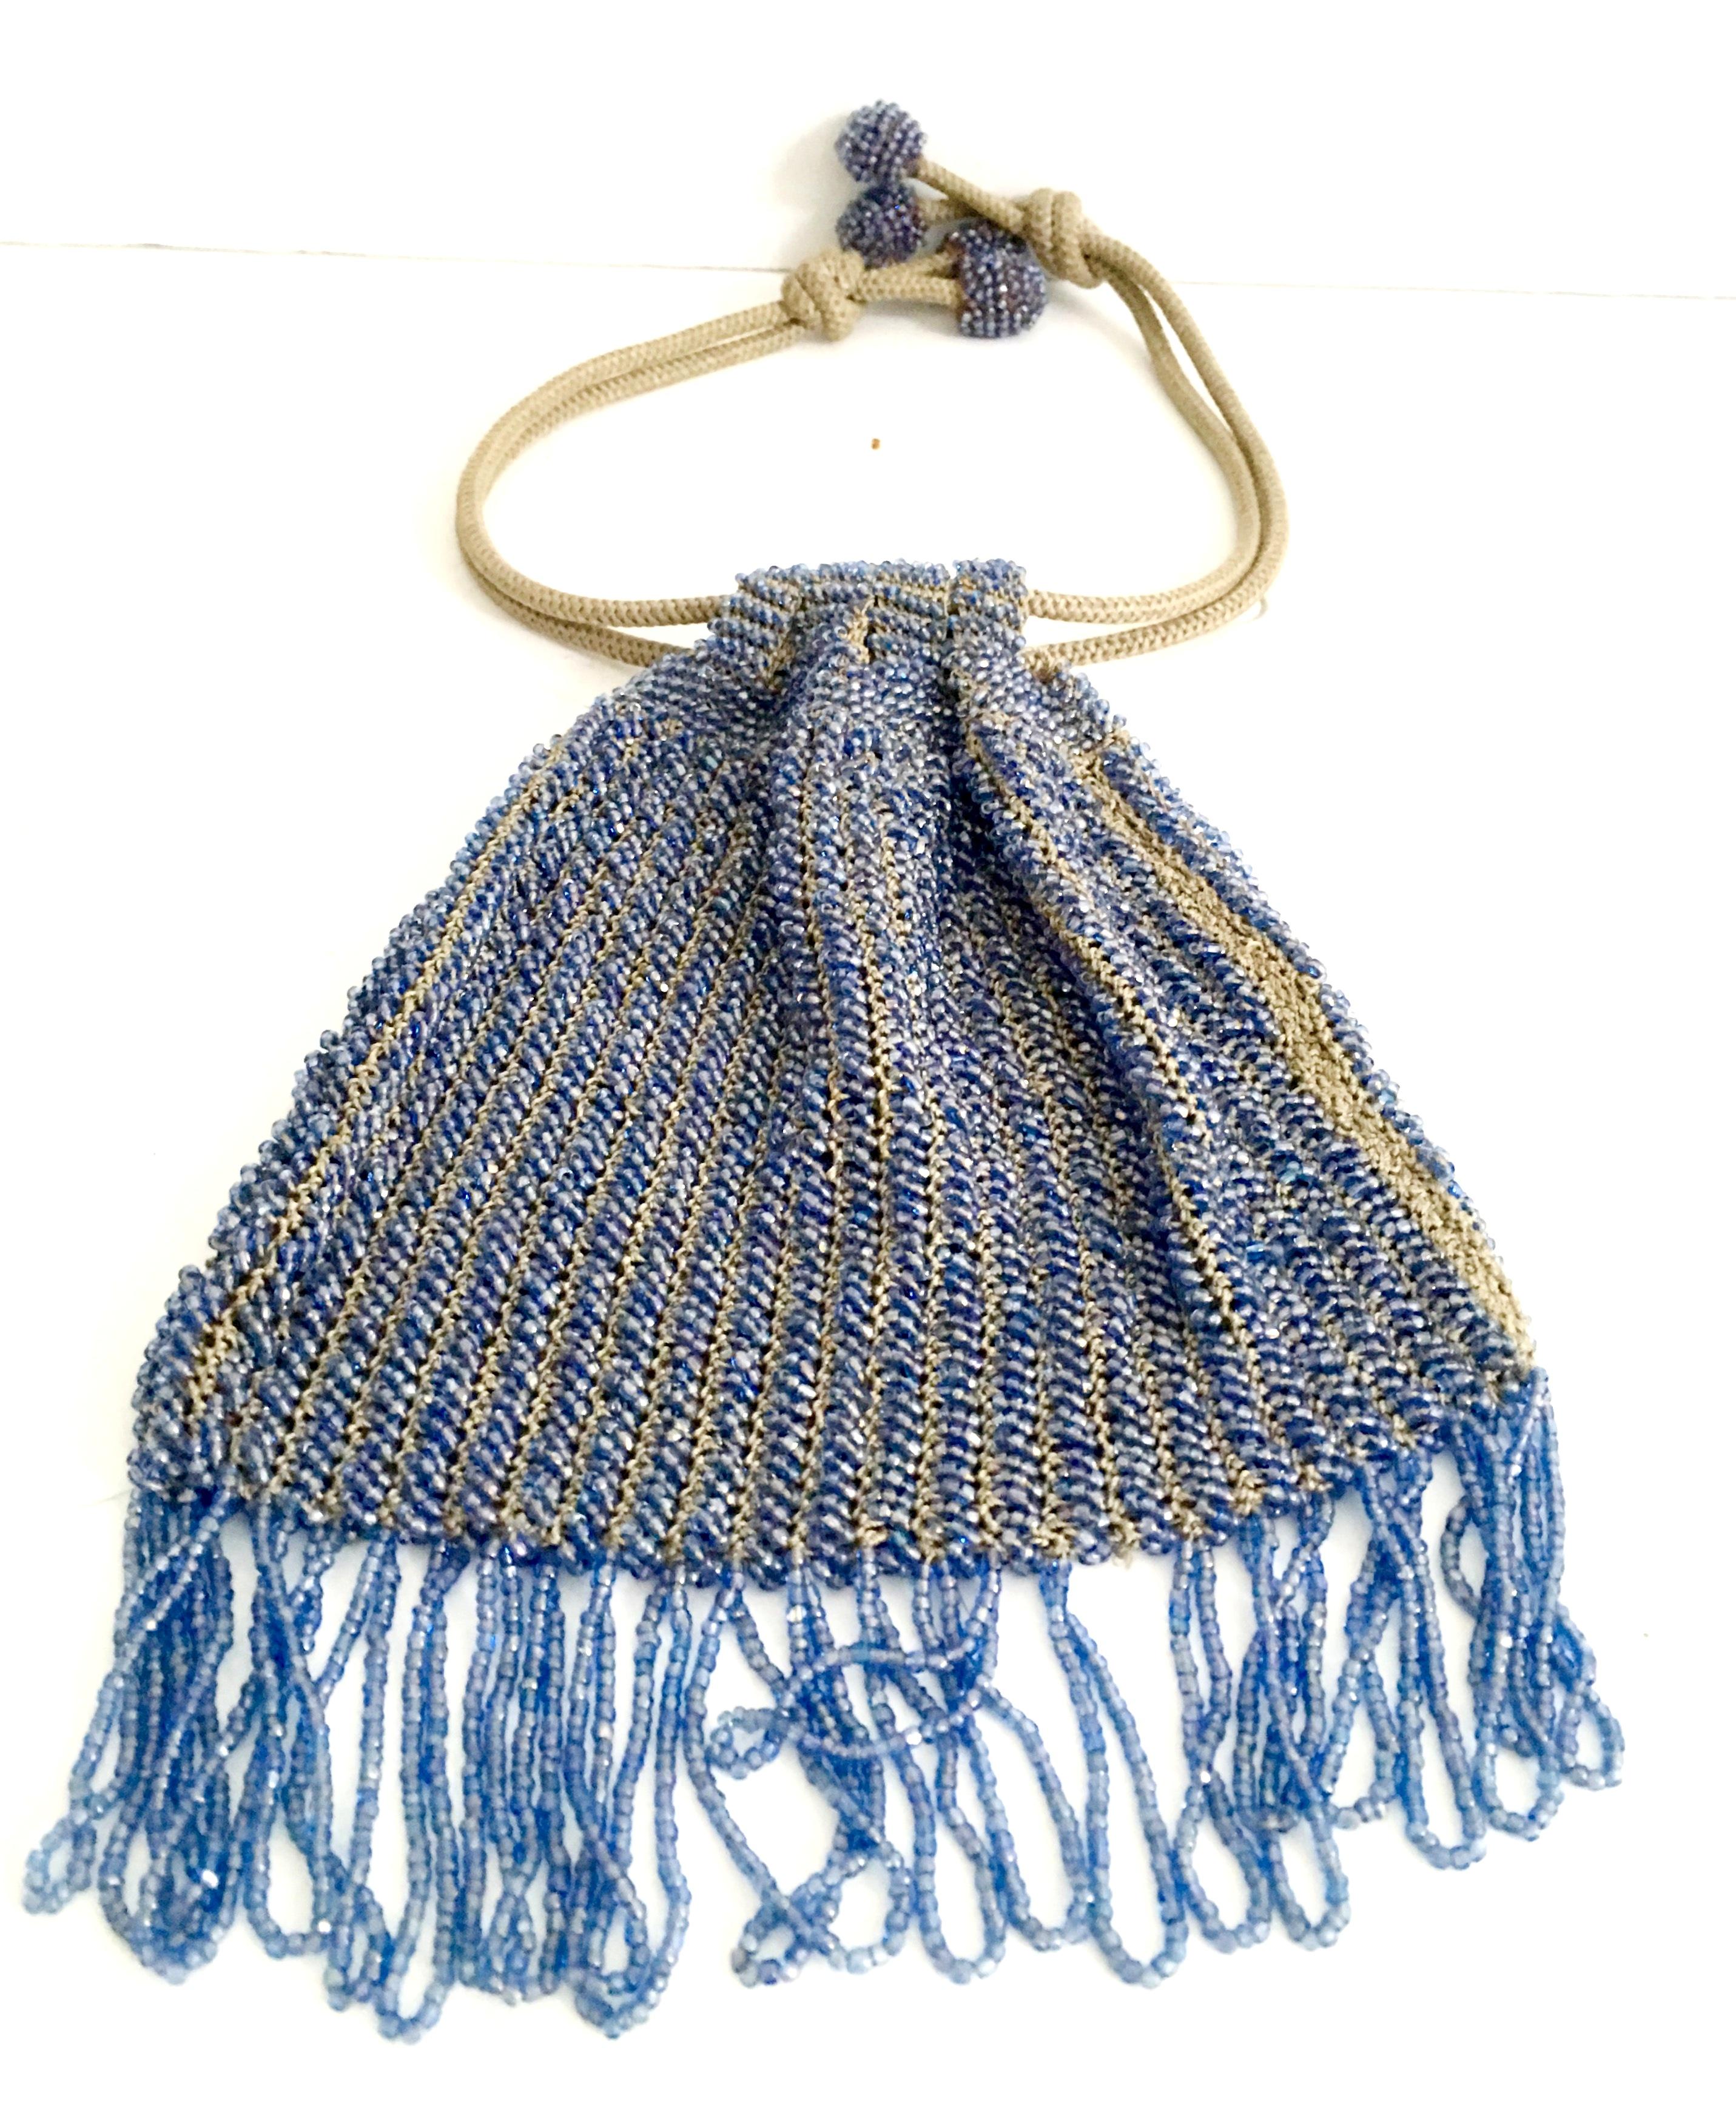 Antique Hand Cut Art Glass beaded woven crochet drawstring flapper evening bag. Executed with blue iridescent art glass beads and woven with khaki knit crochet style stitching. The drawstring is made of the same khaki color rope. Each end of the